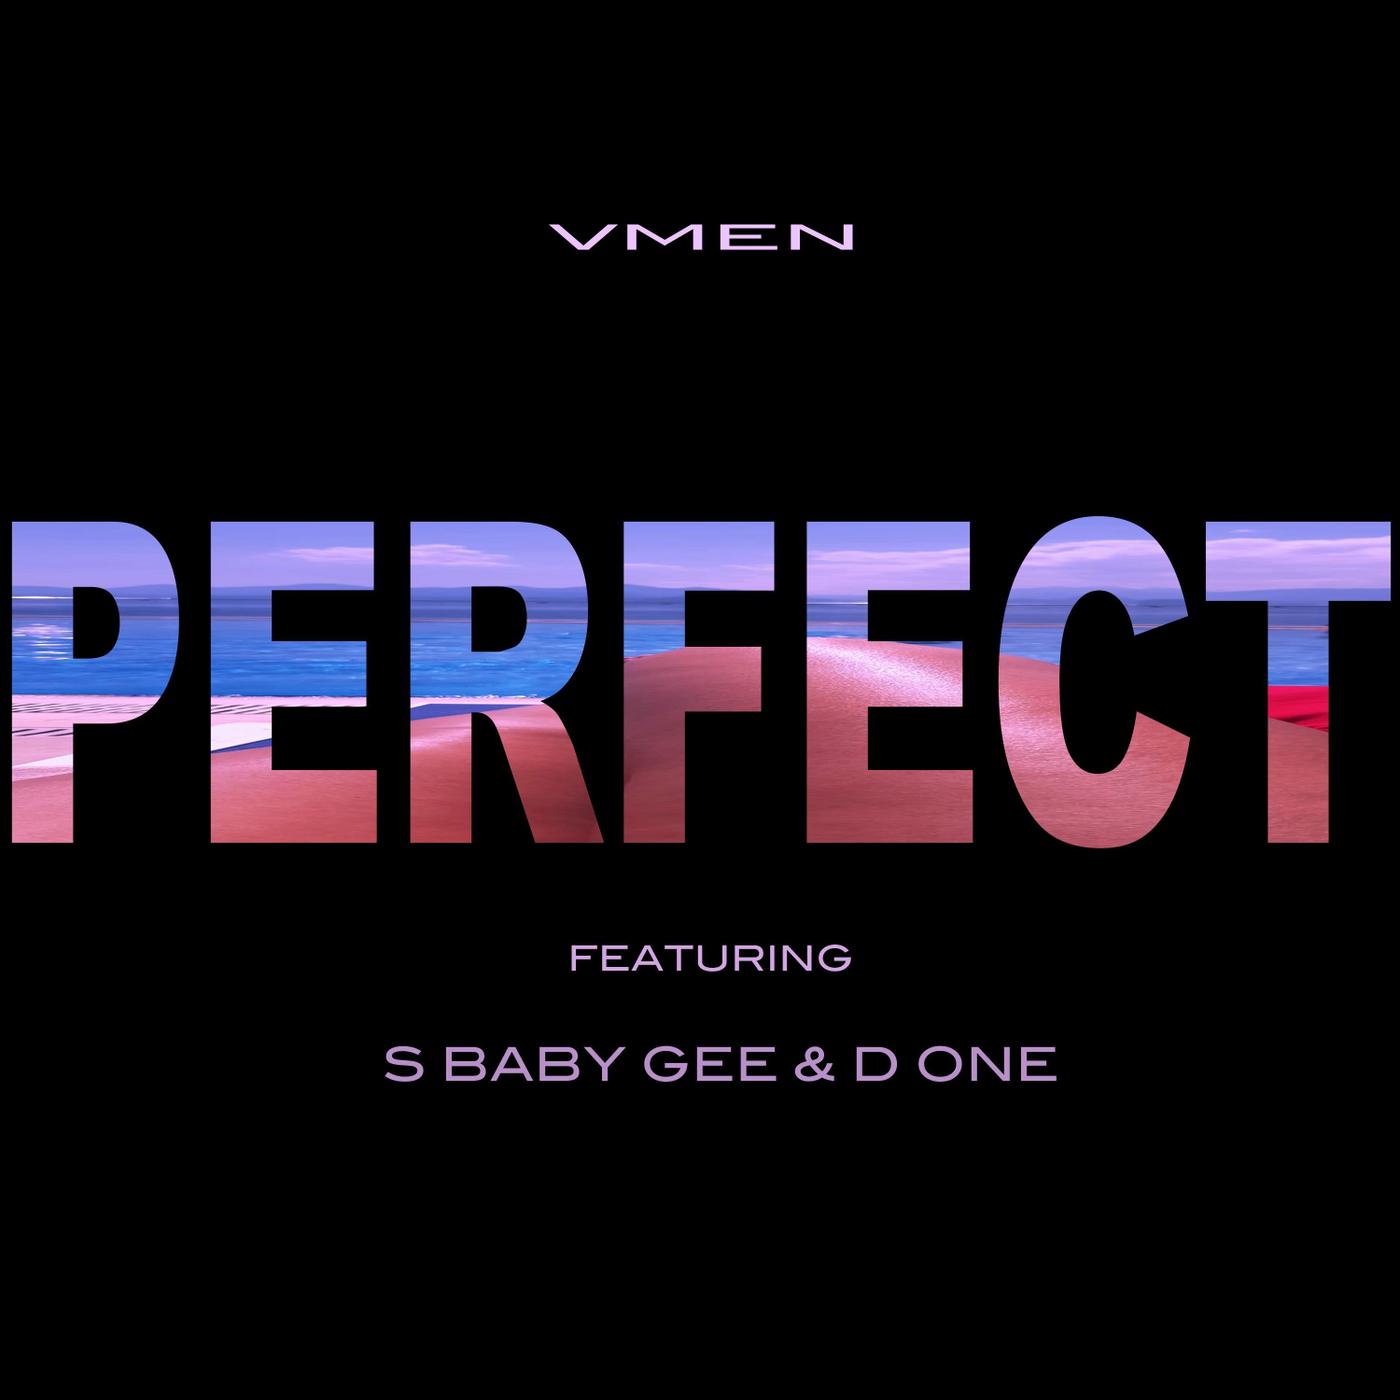 vmen - Perfect (feat. S Baby Gee & D One)